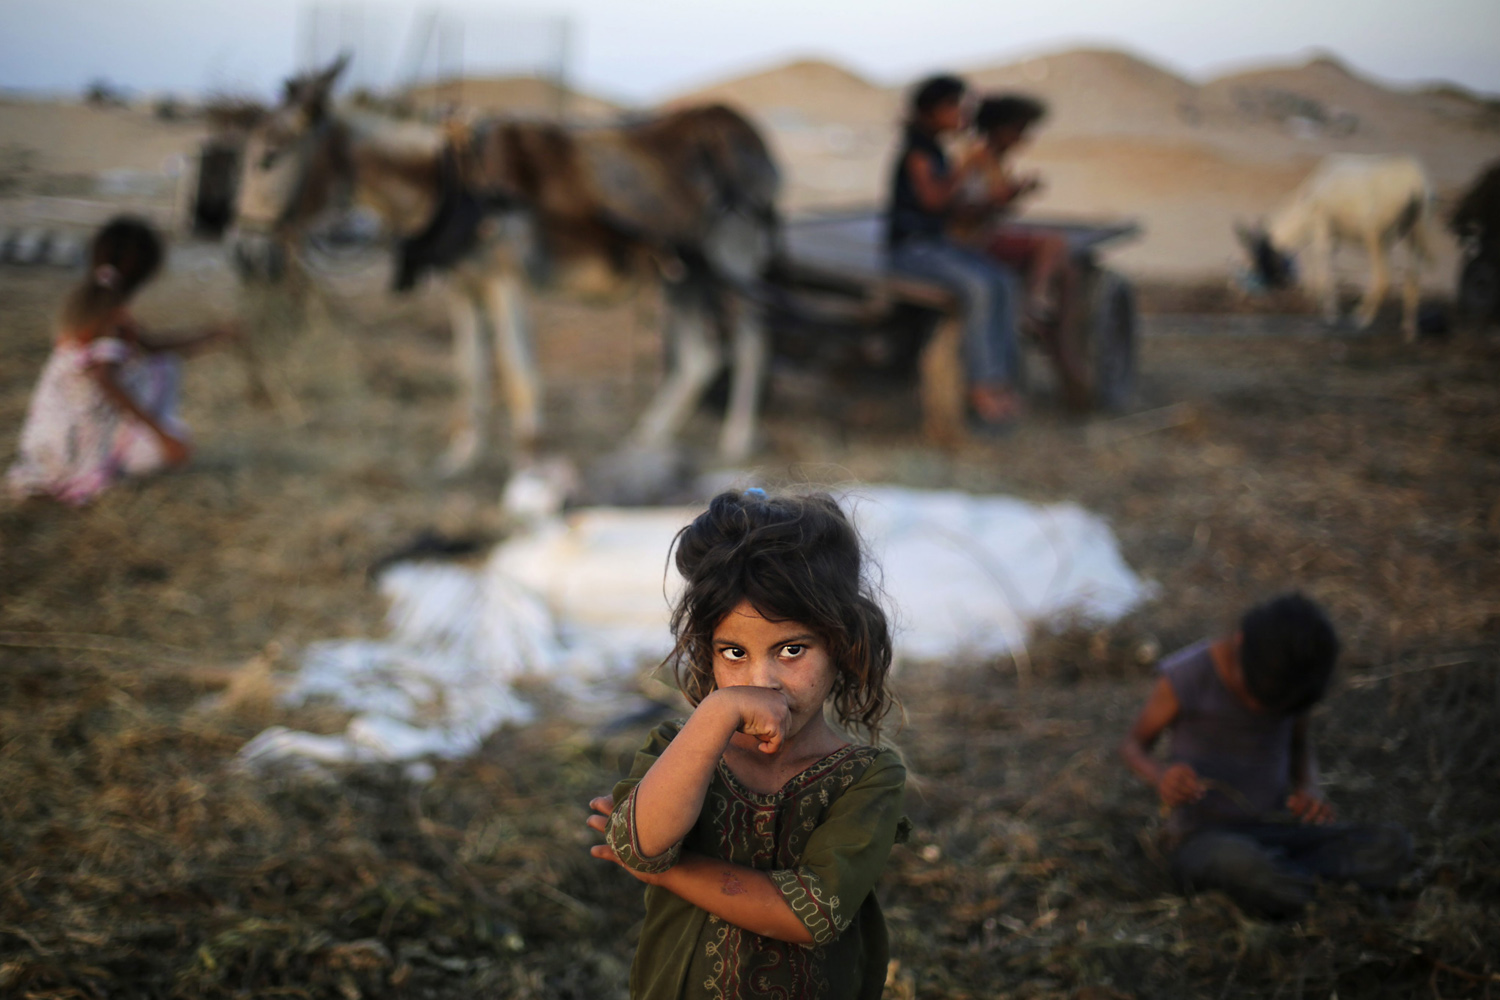 June 26, 2013. Palestinian children play outside their family's tent in a poverty-stricken quarter of the town of Younis, in the southern Gaza Strip.